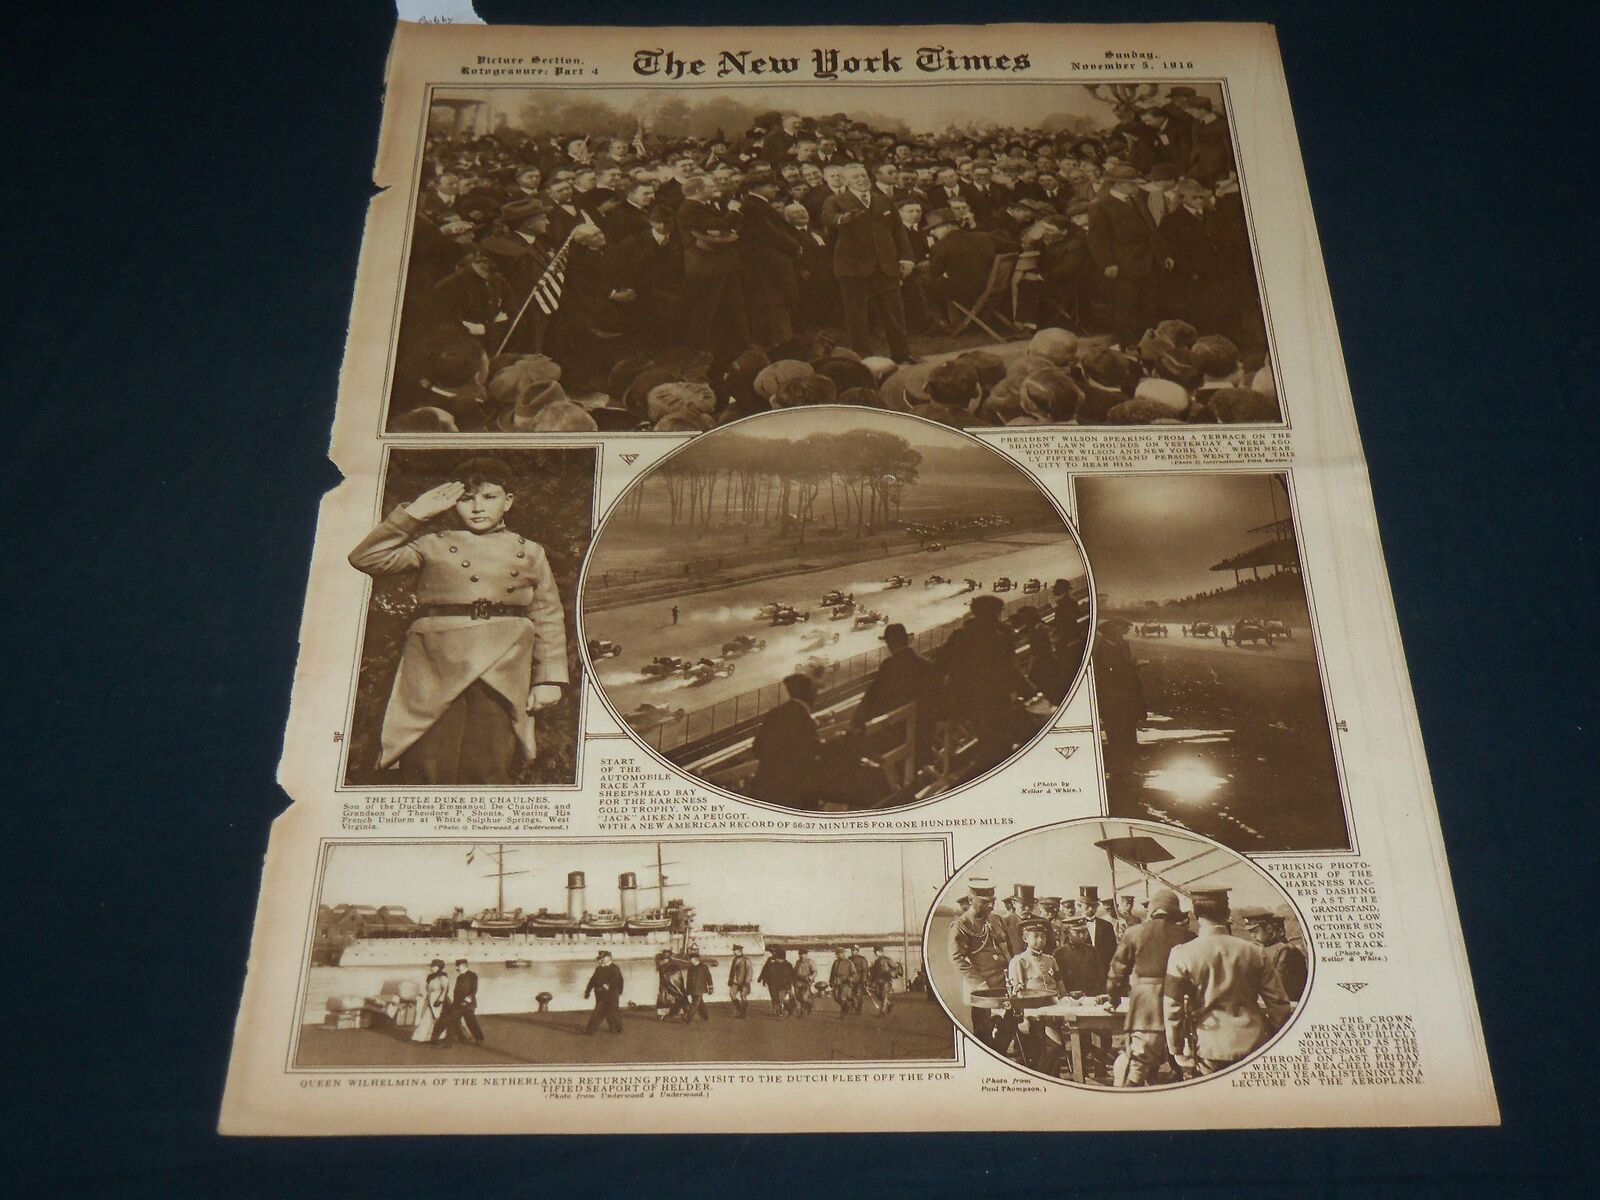 1916 NOV 5 NEW YORK TIMES PICTURE SECTION - 14 YEAR OLD BOBBY JONES - NT 8969